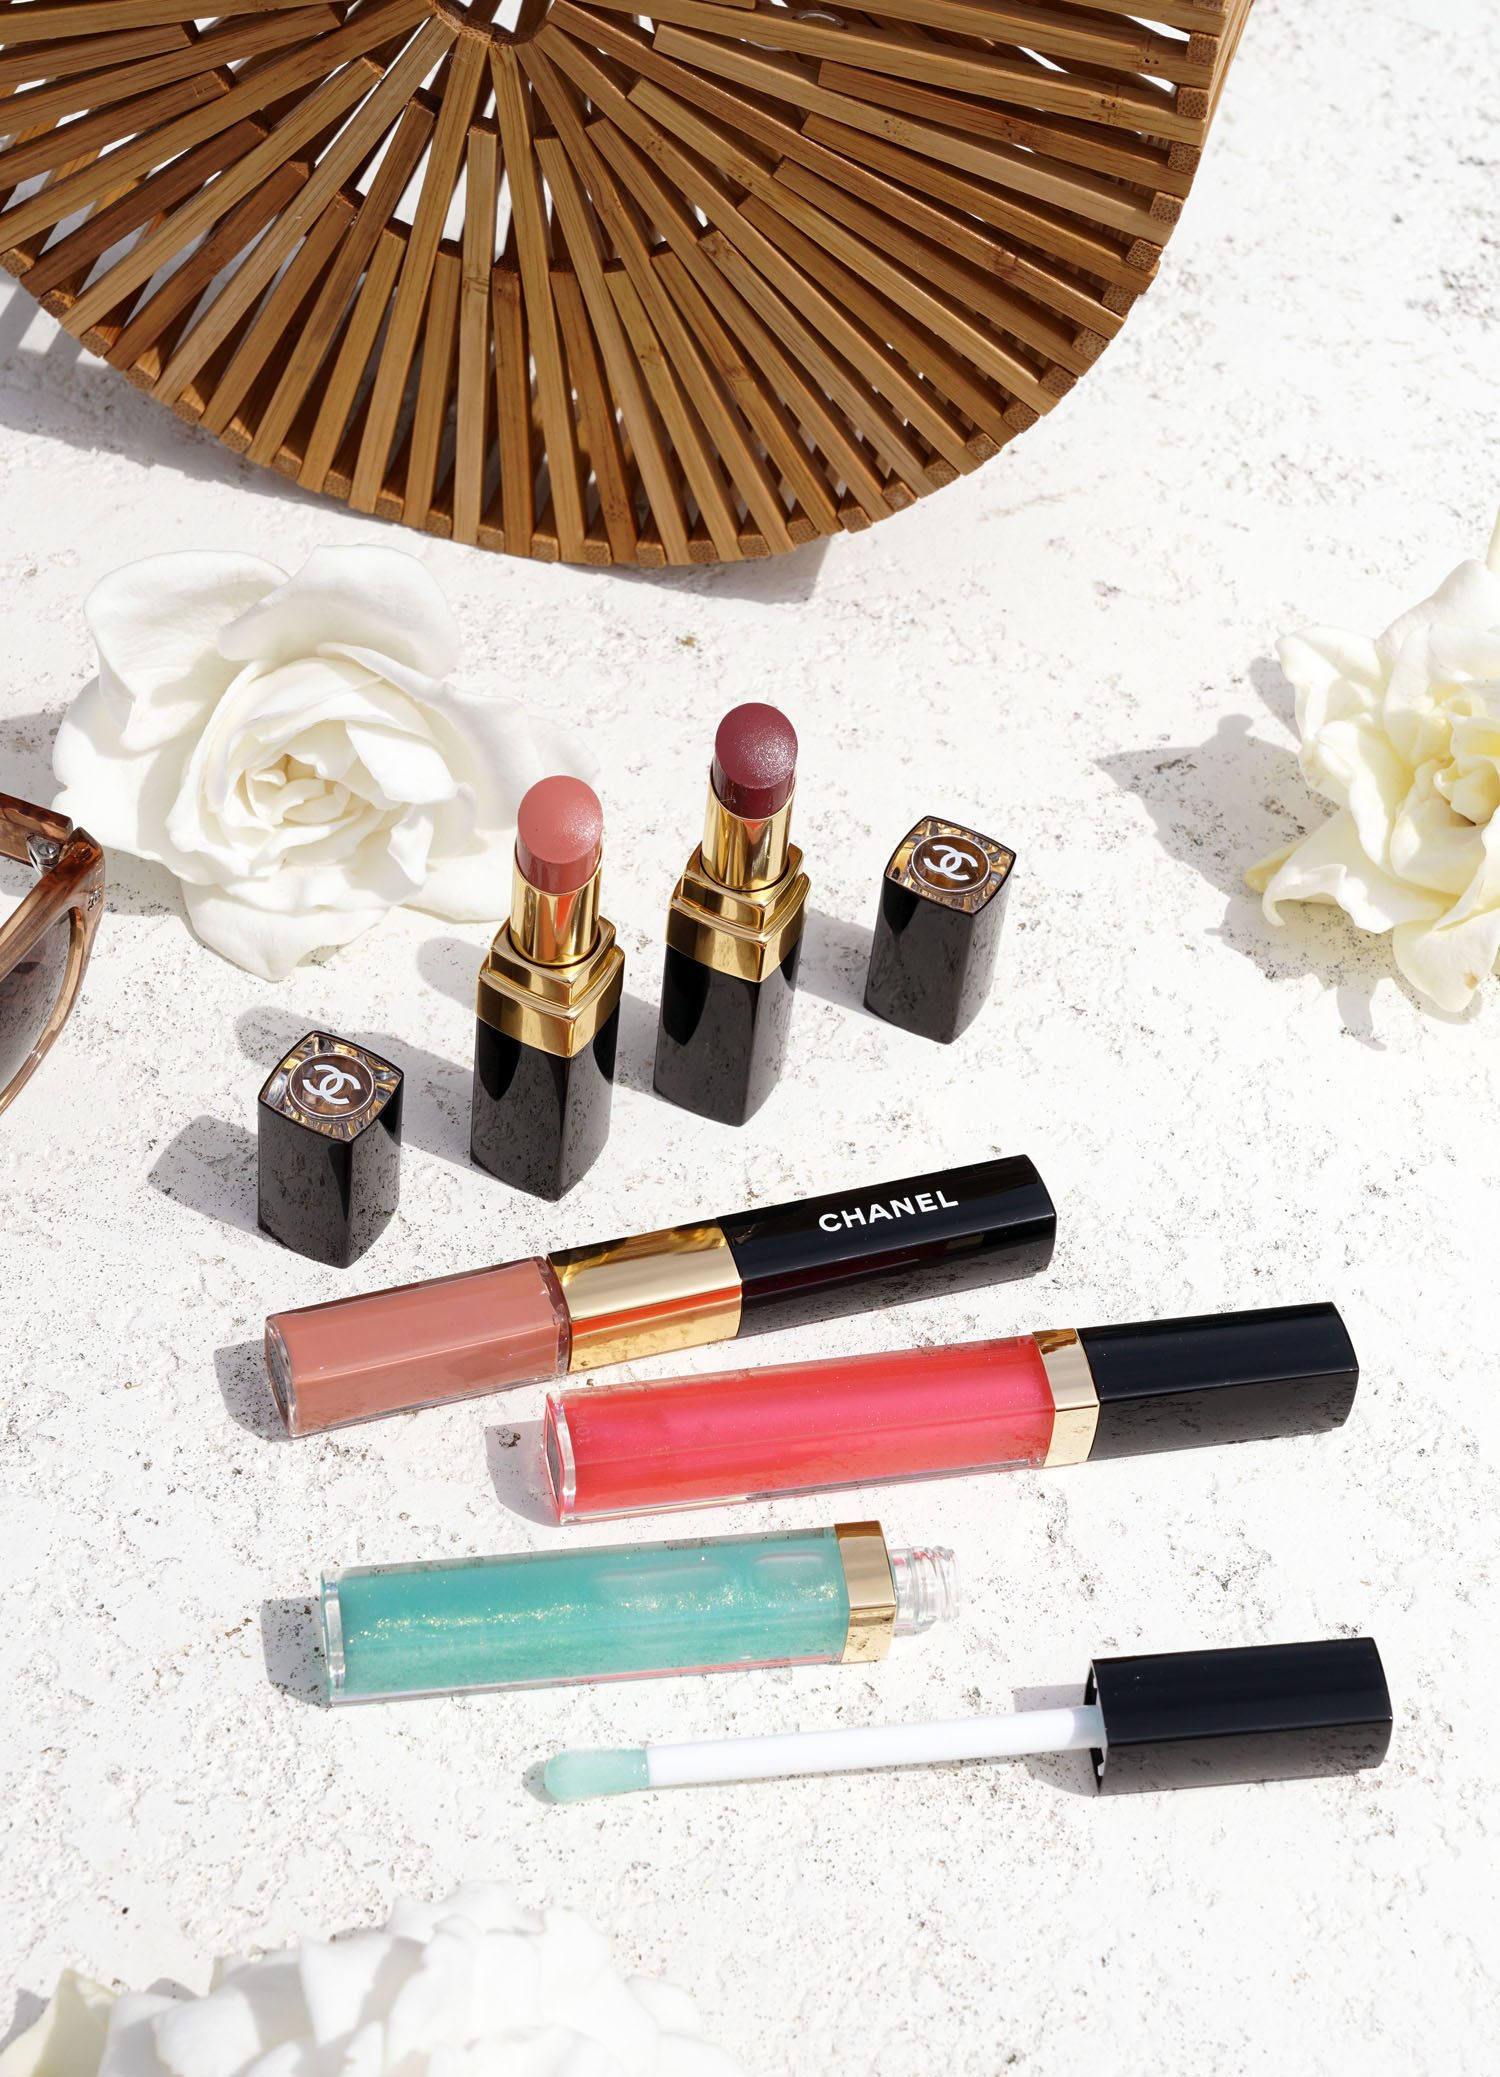 Chanel, Spring-Summer 2019 Collection: Review and Swatches